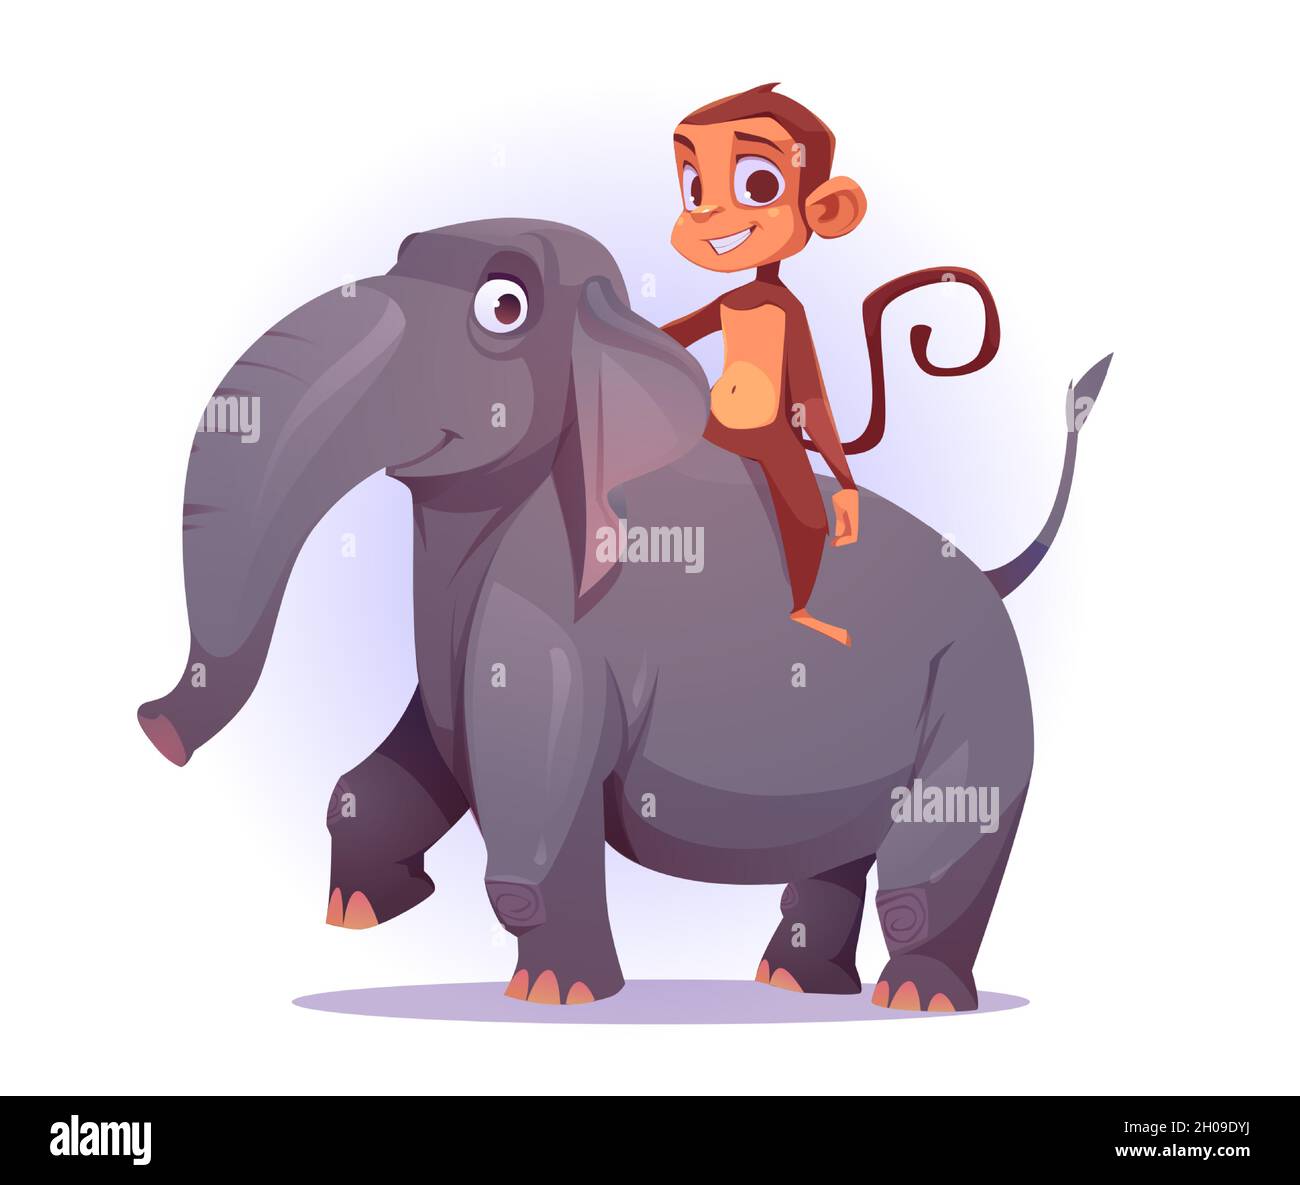 Monkey riding on elephant back, cute cartoon characters, funny ape mascot smiling, game or book personages portrait, mammal wild jungle creatures isolated on white background, Vector illustration Stock Vector